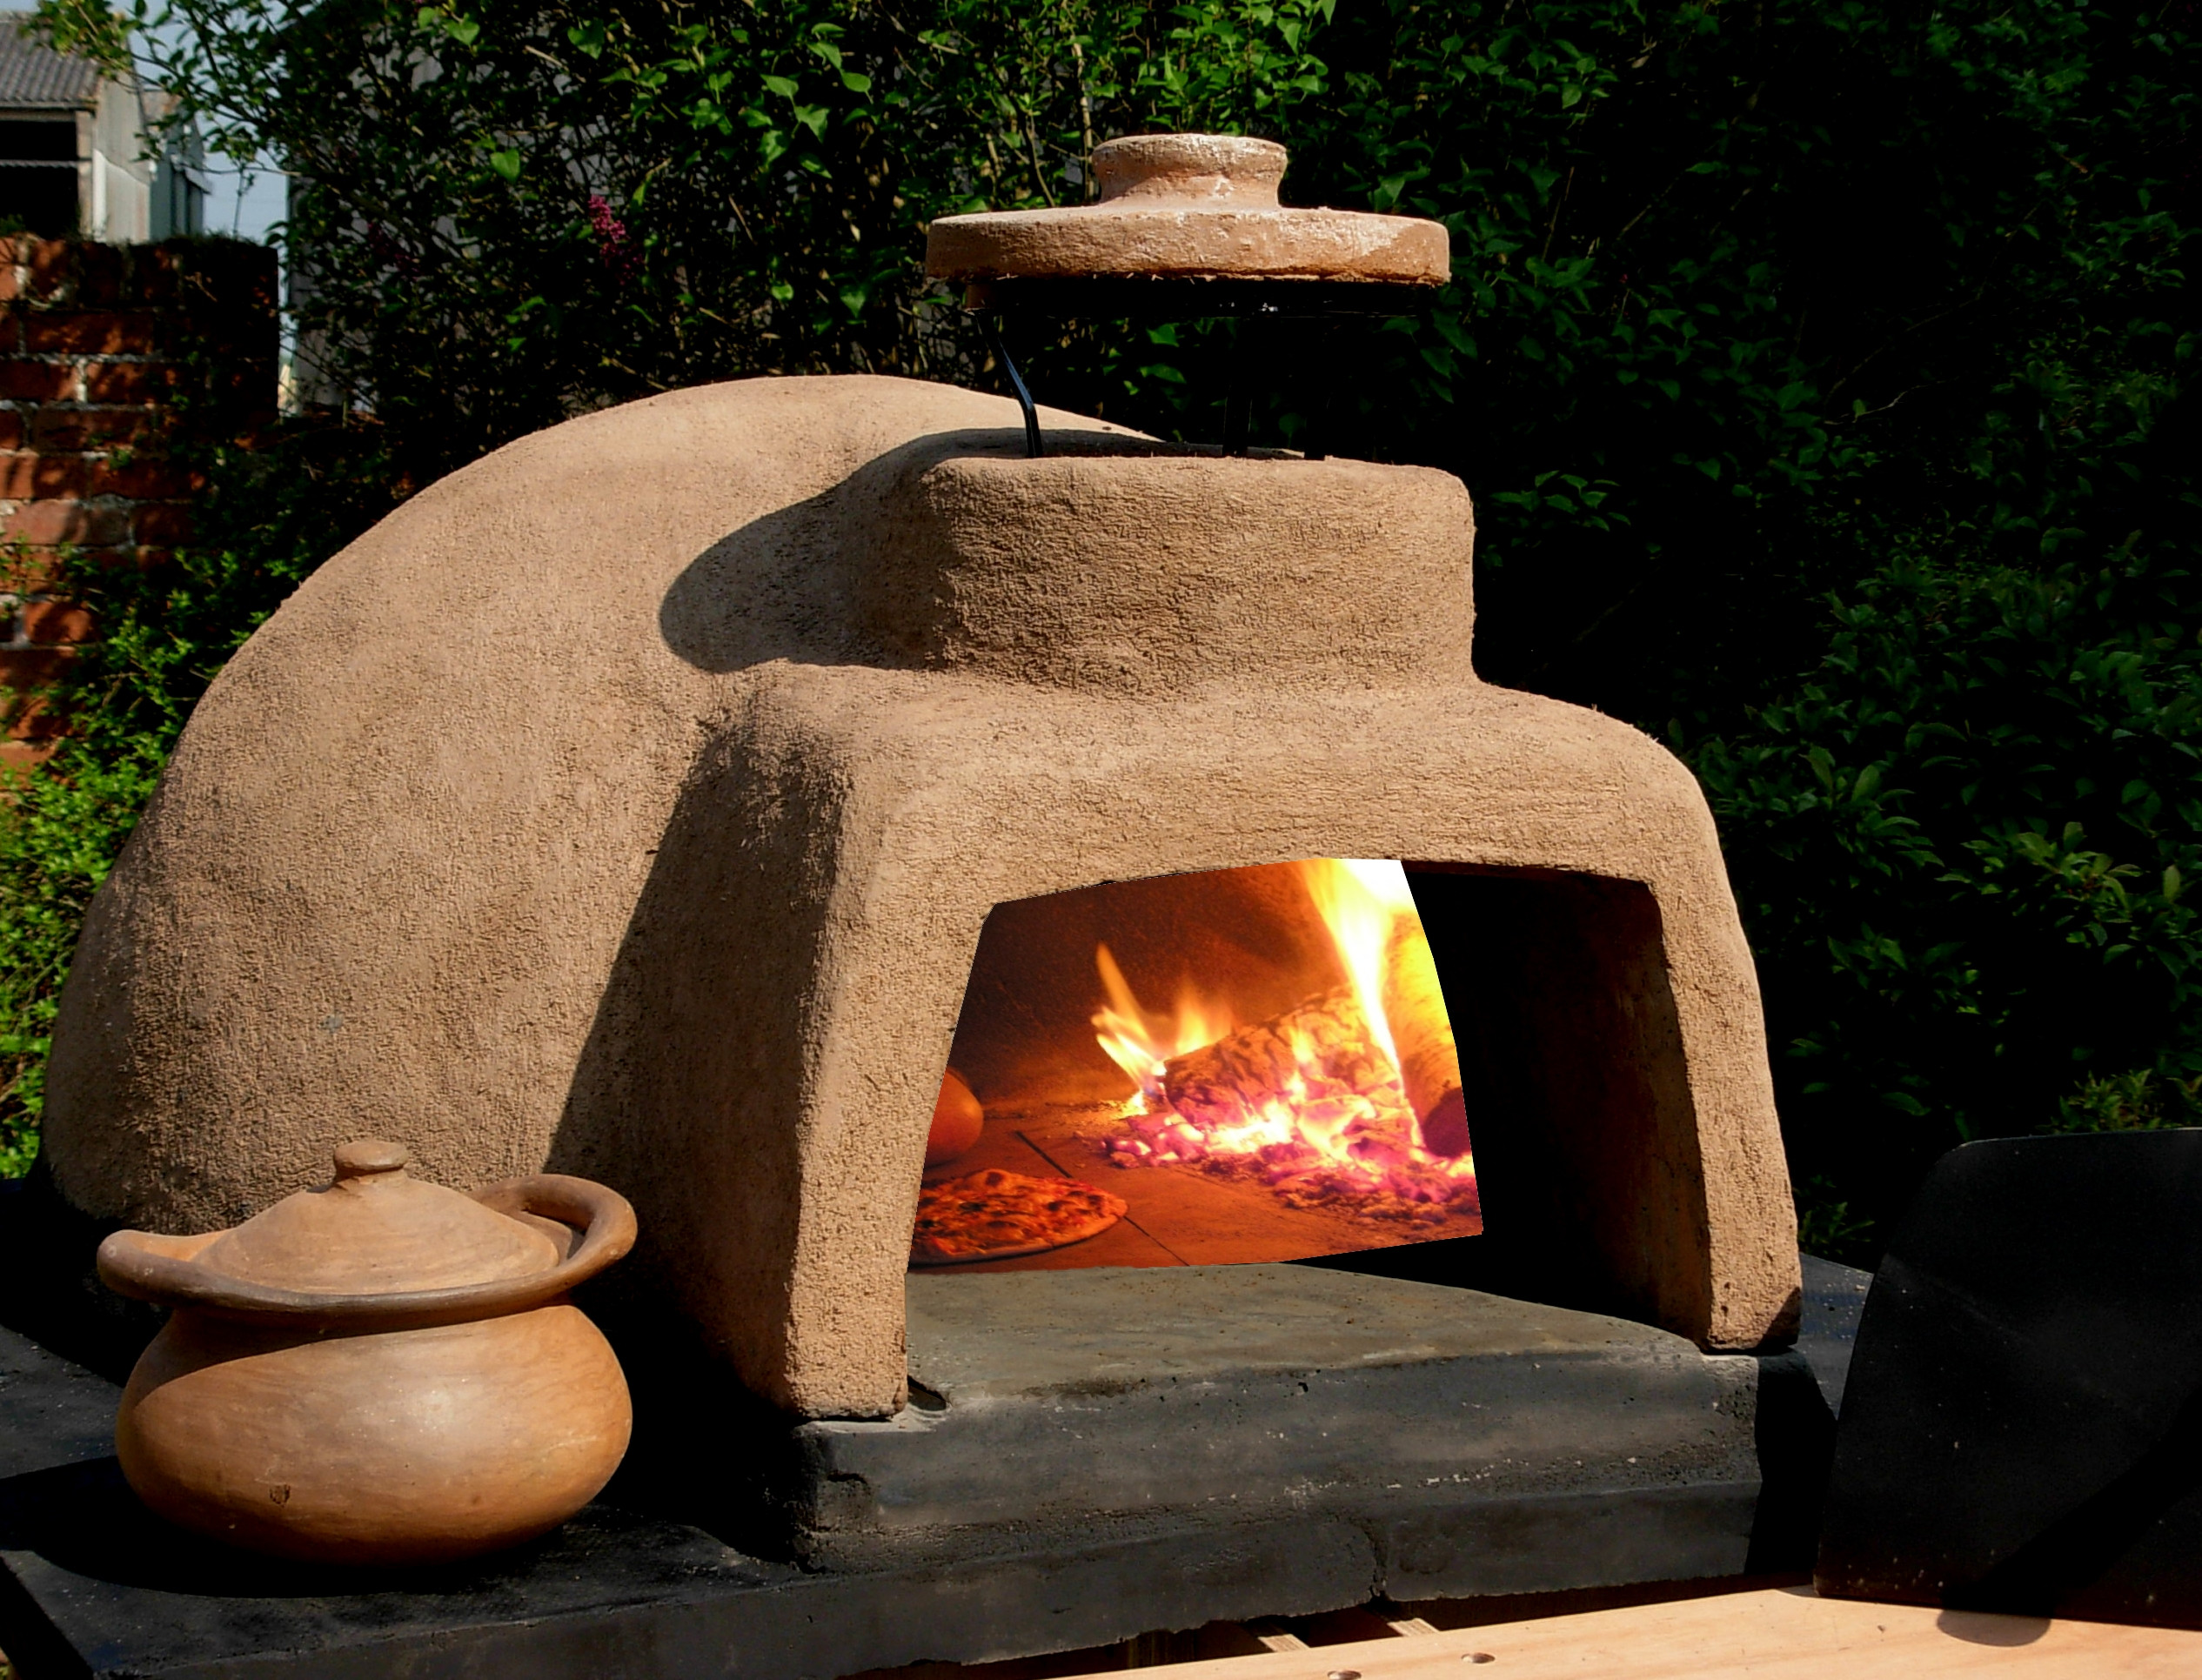 Outdoor Wood Oven DIY
 15 DIY Pizza Oven Plans For Outdoors Backing – The Self